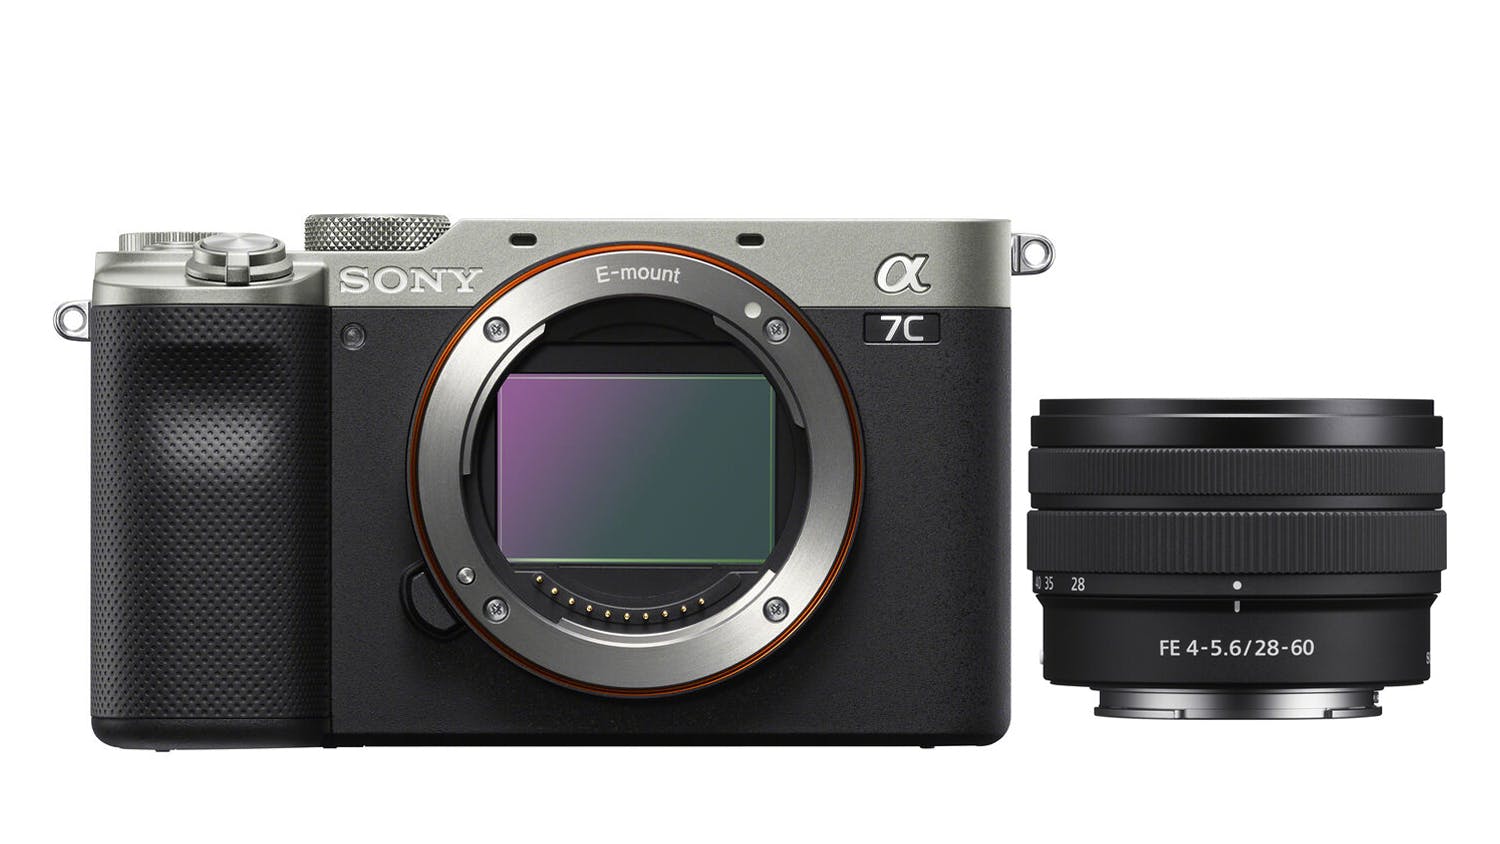 Sony a7C Mirrorless Camera with 24-70mm f/4 Lens and Accessories